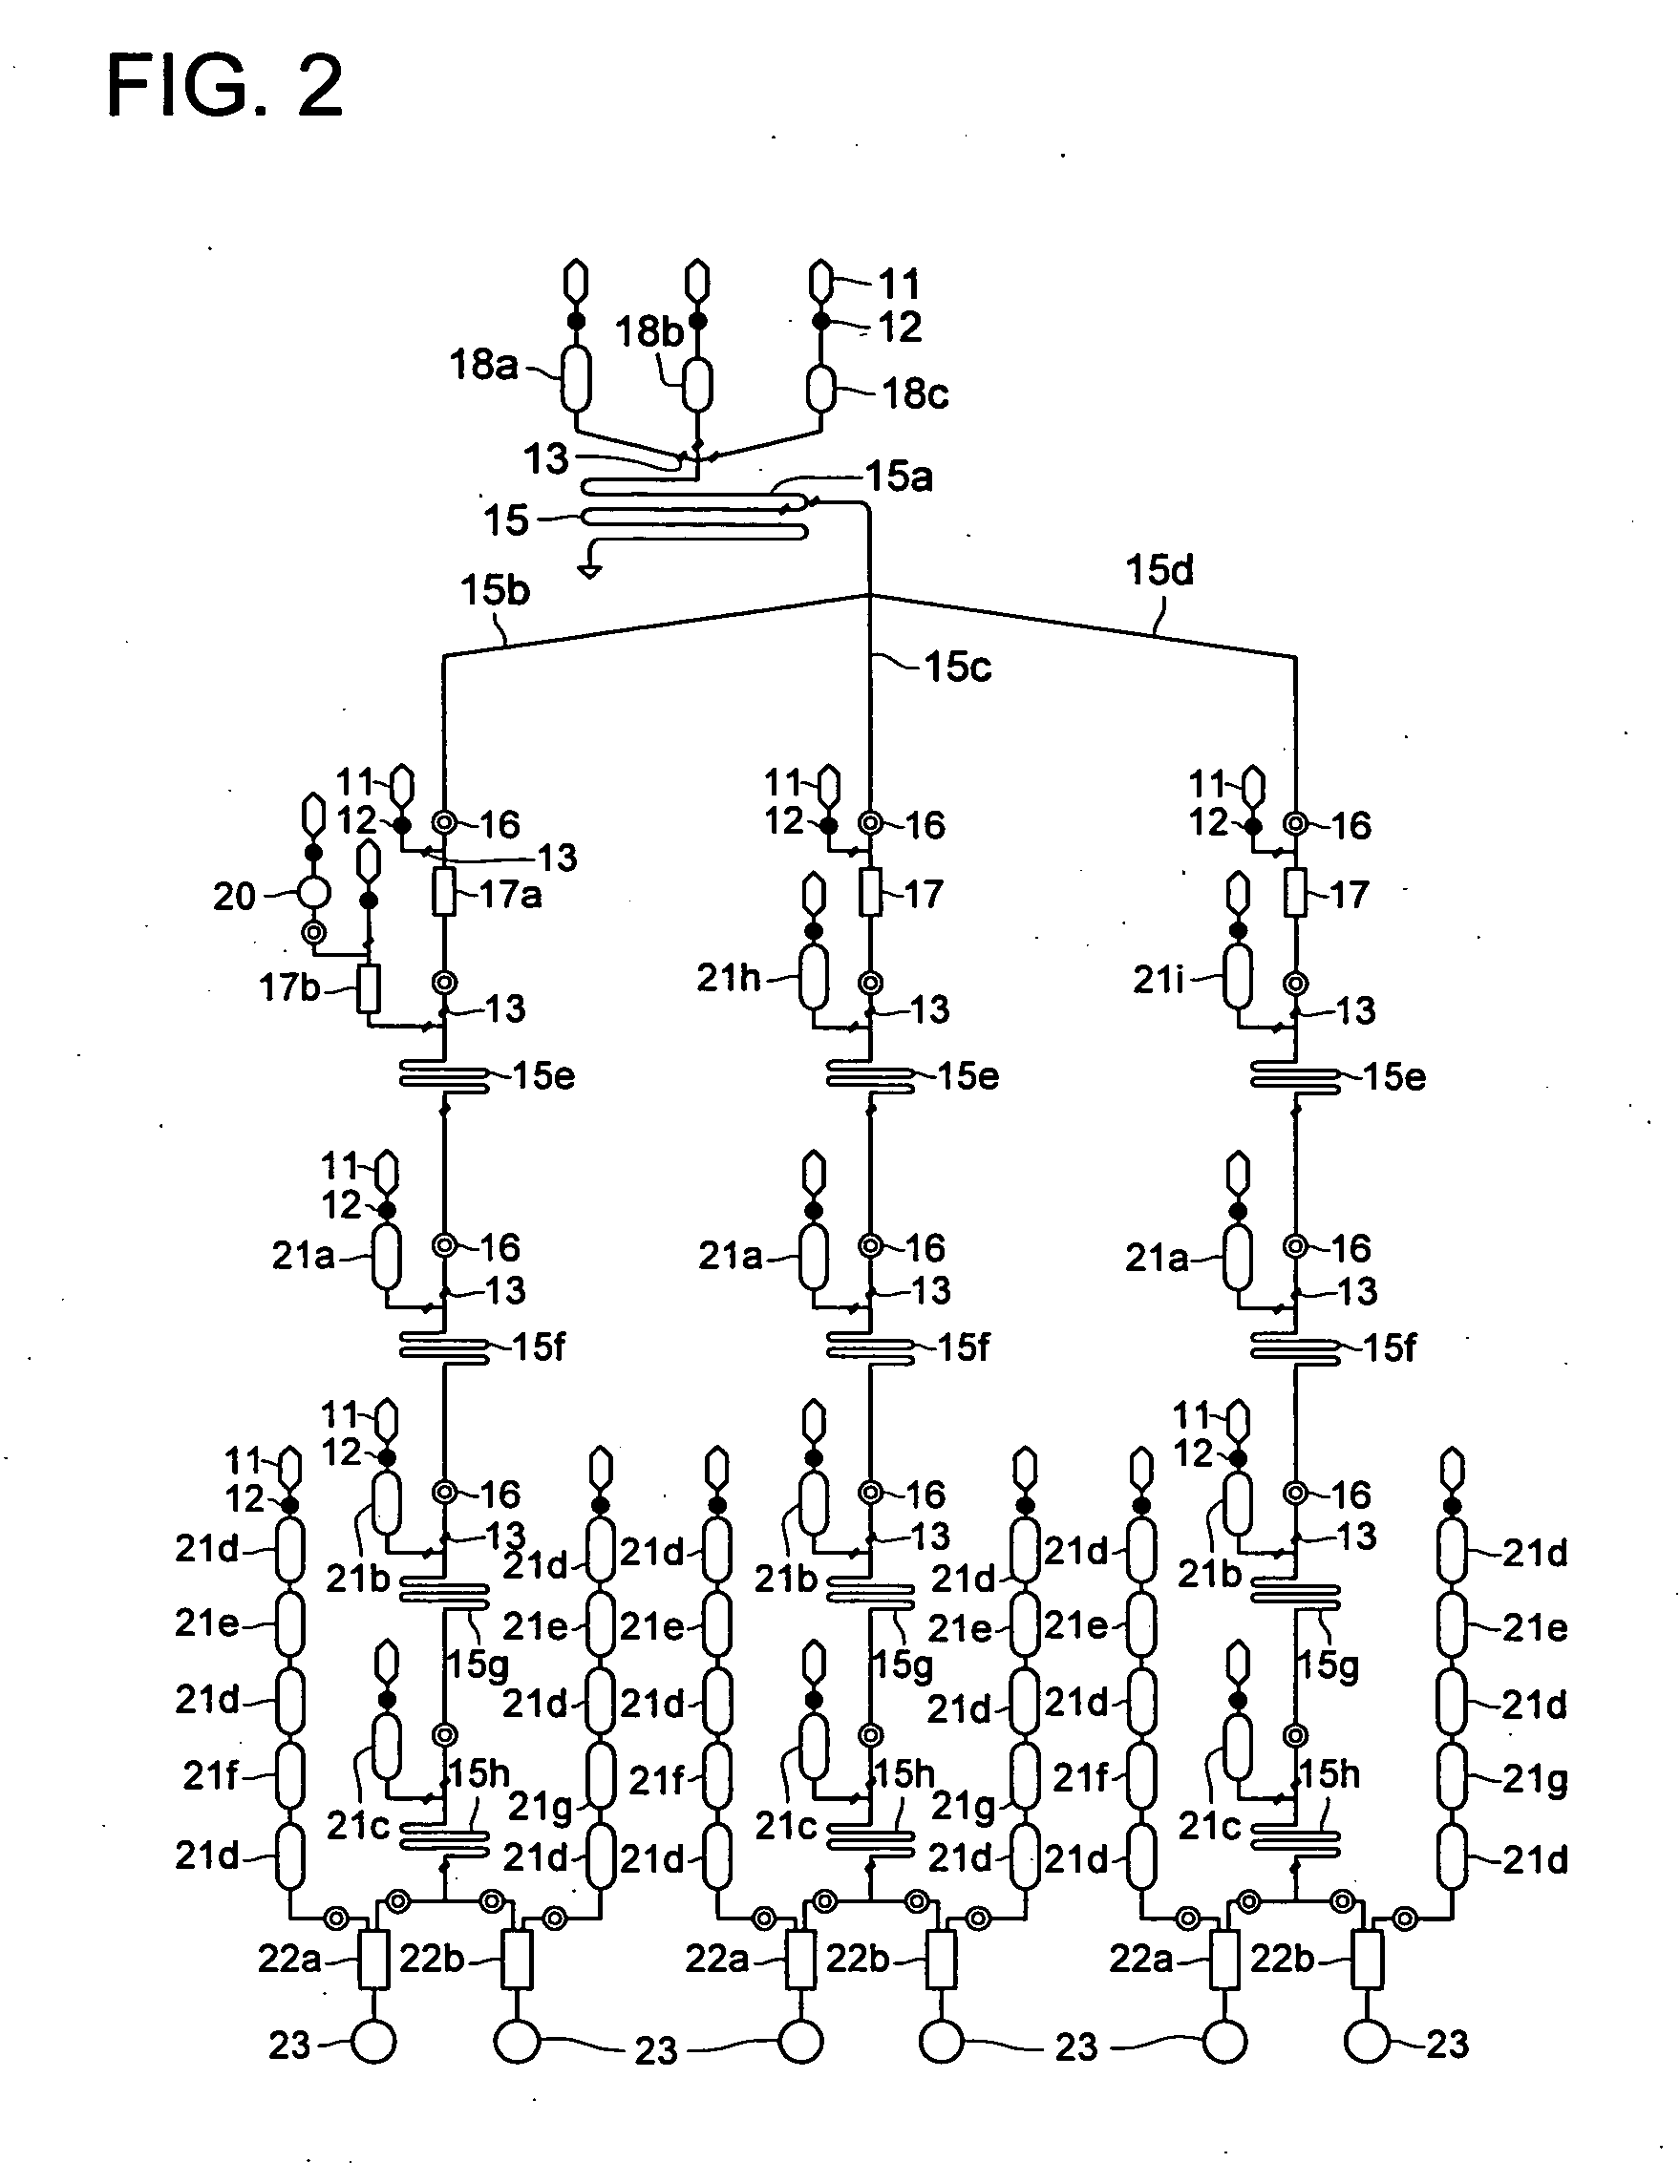 Inspection microchip and inspection device using the chip